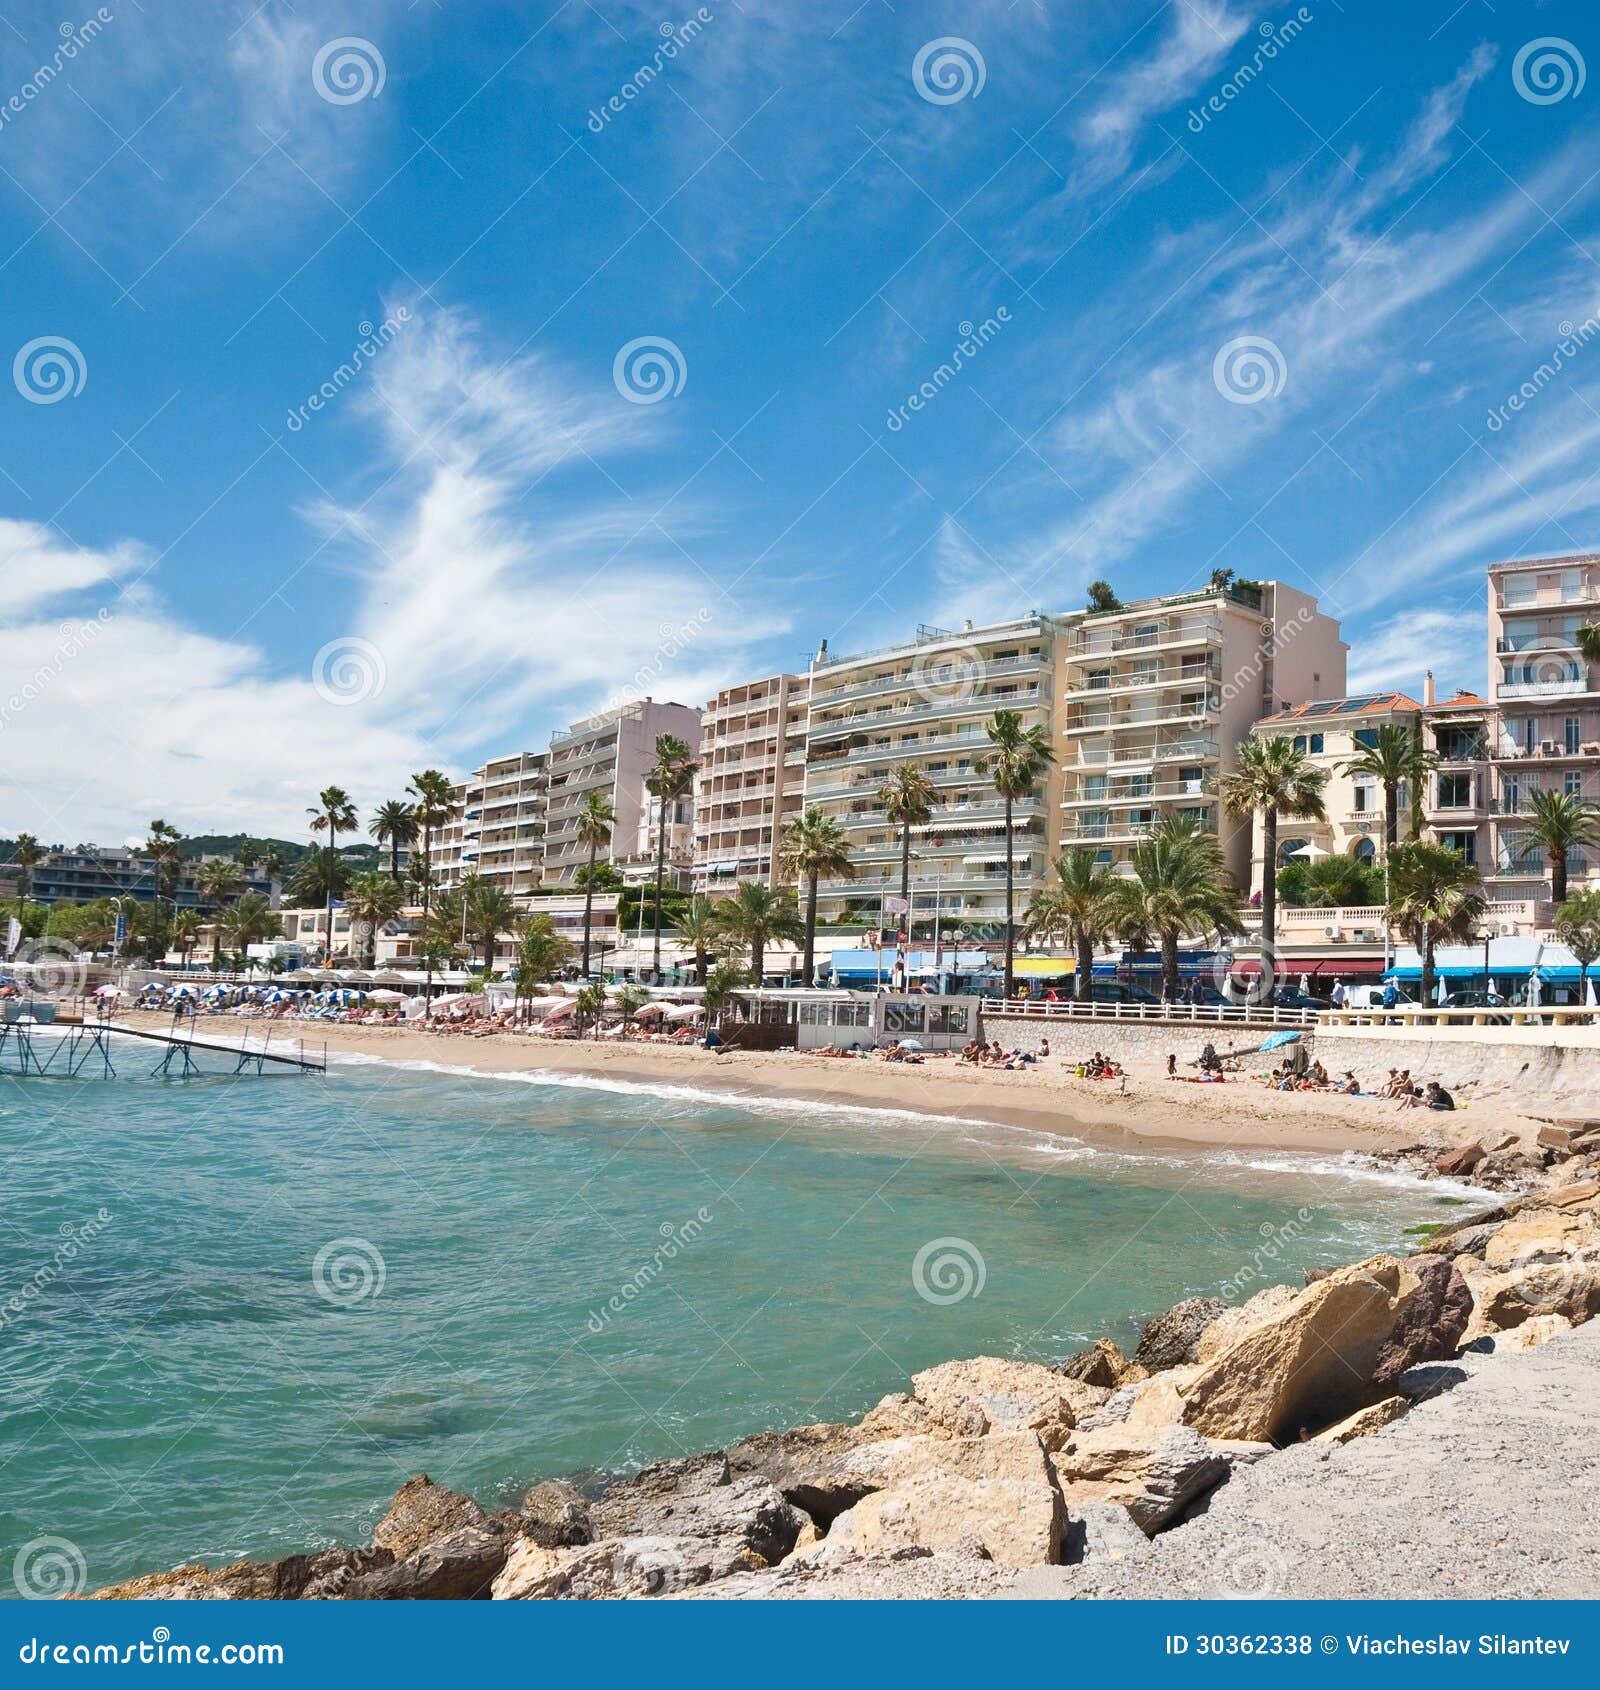 beach in cannes